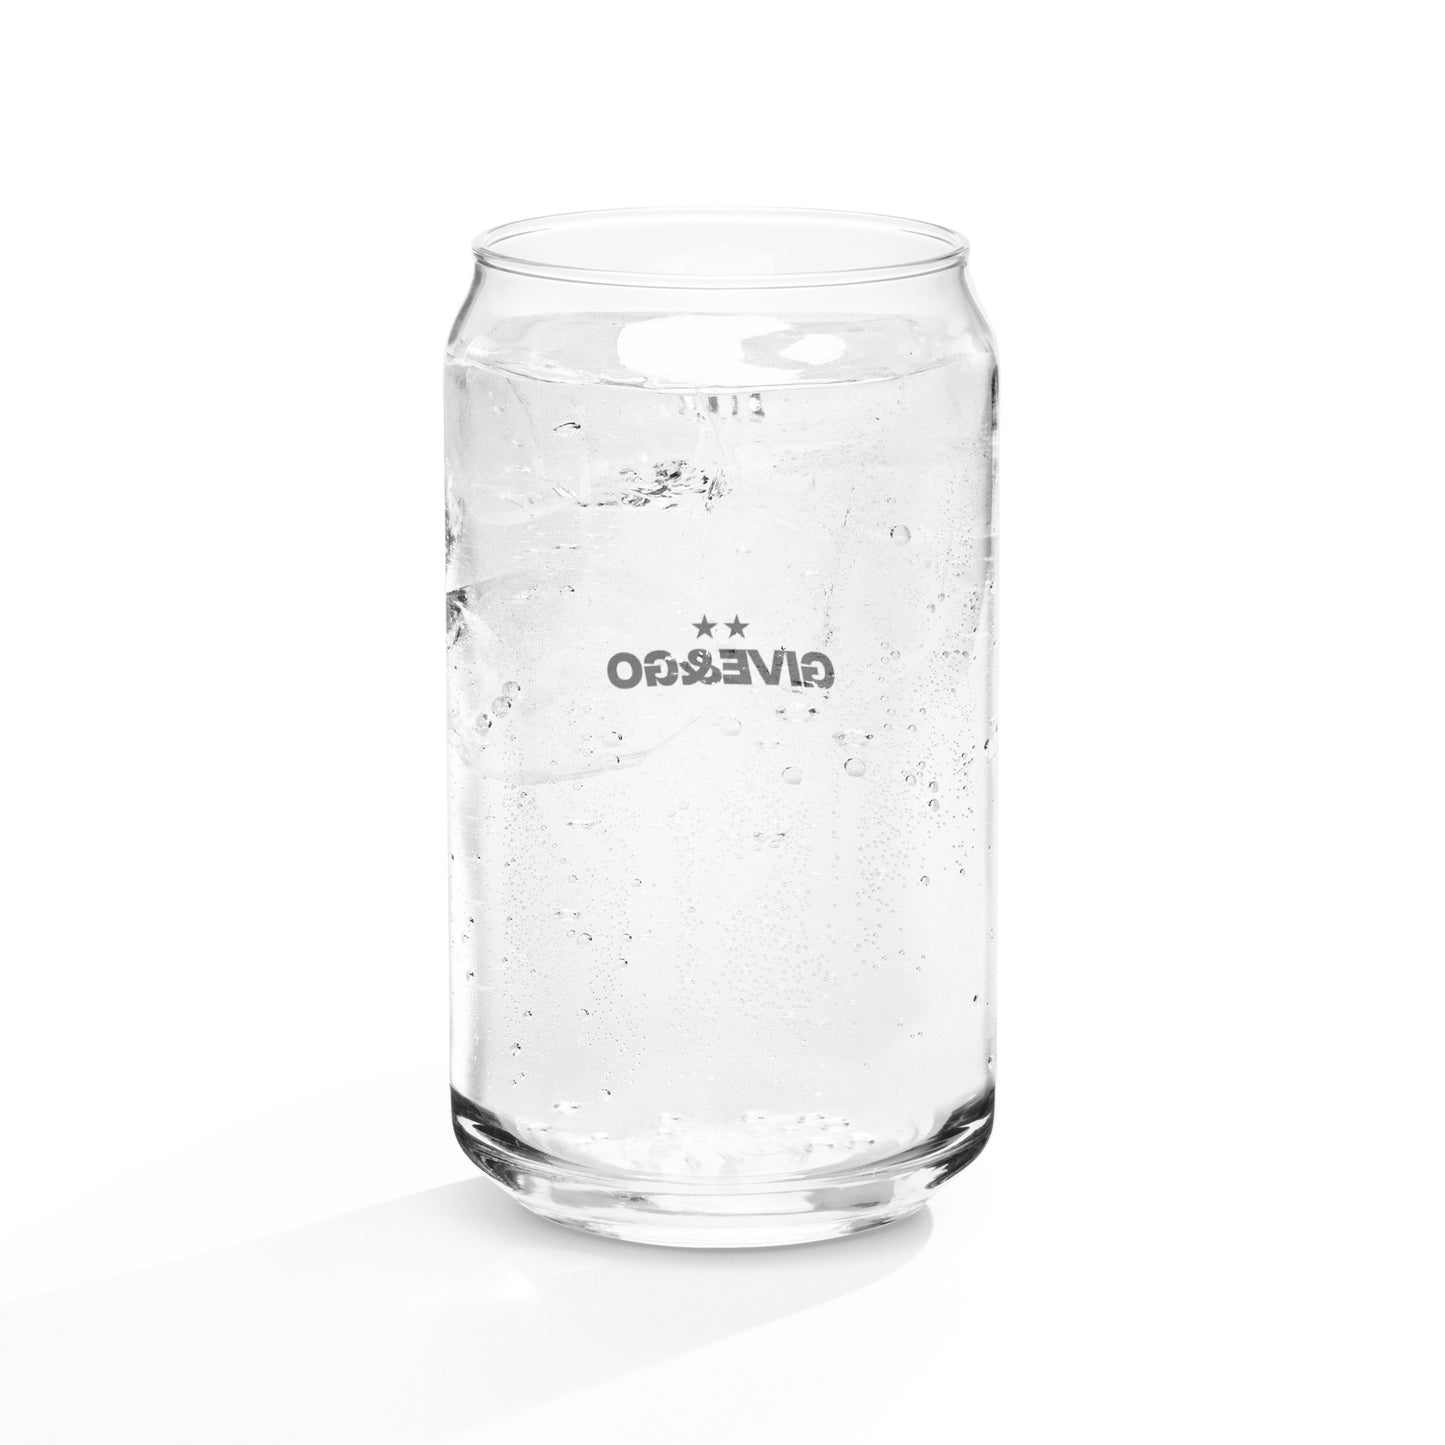 GIVE&GO HYDRATION GLASS